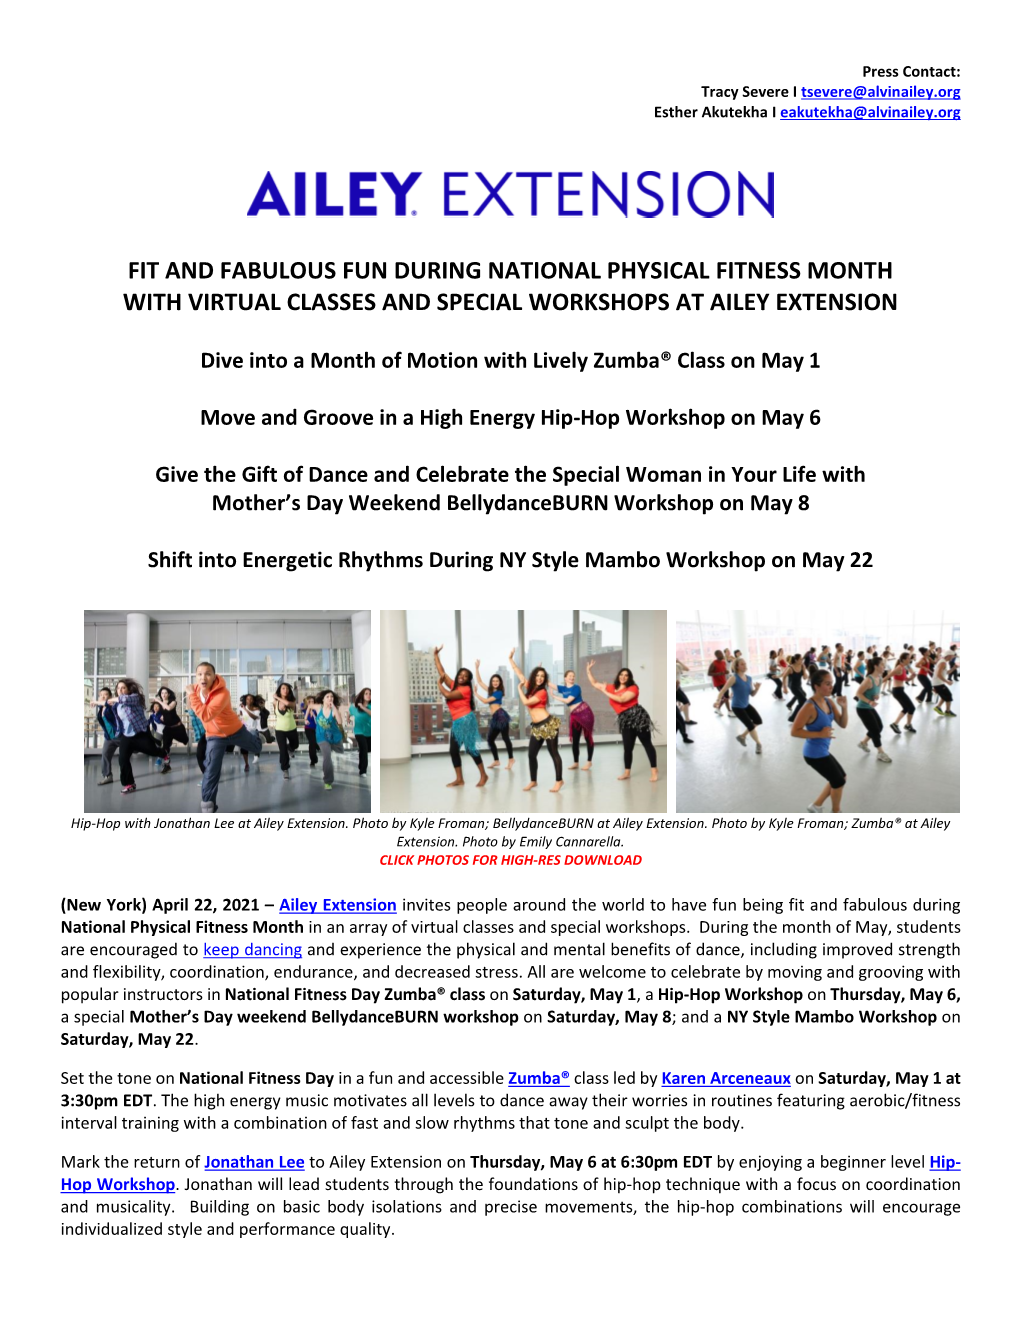 Fit and Fabulous Fun During National Physical Fitness Month with Virtual Classes and Special Workshops at Ailey Extension